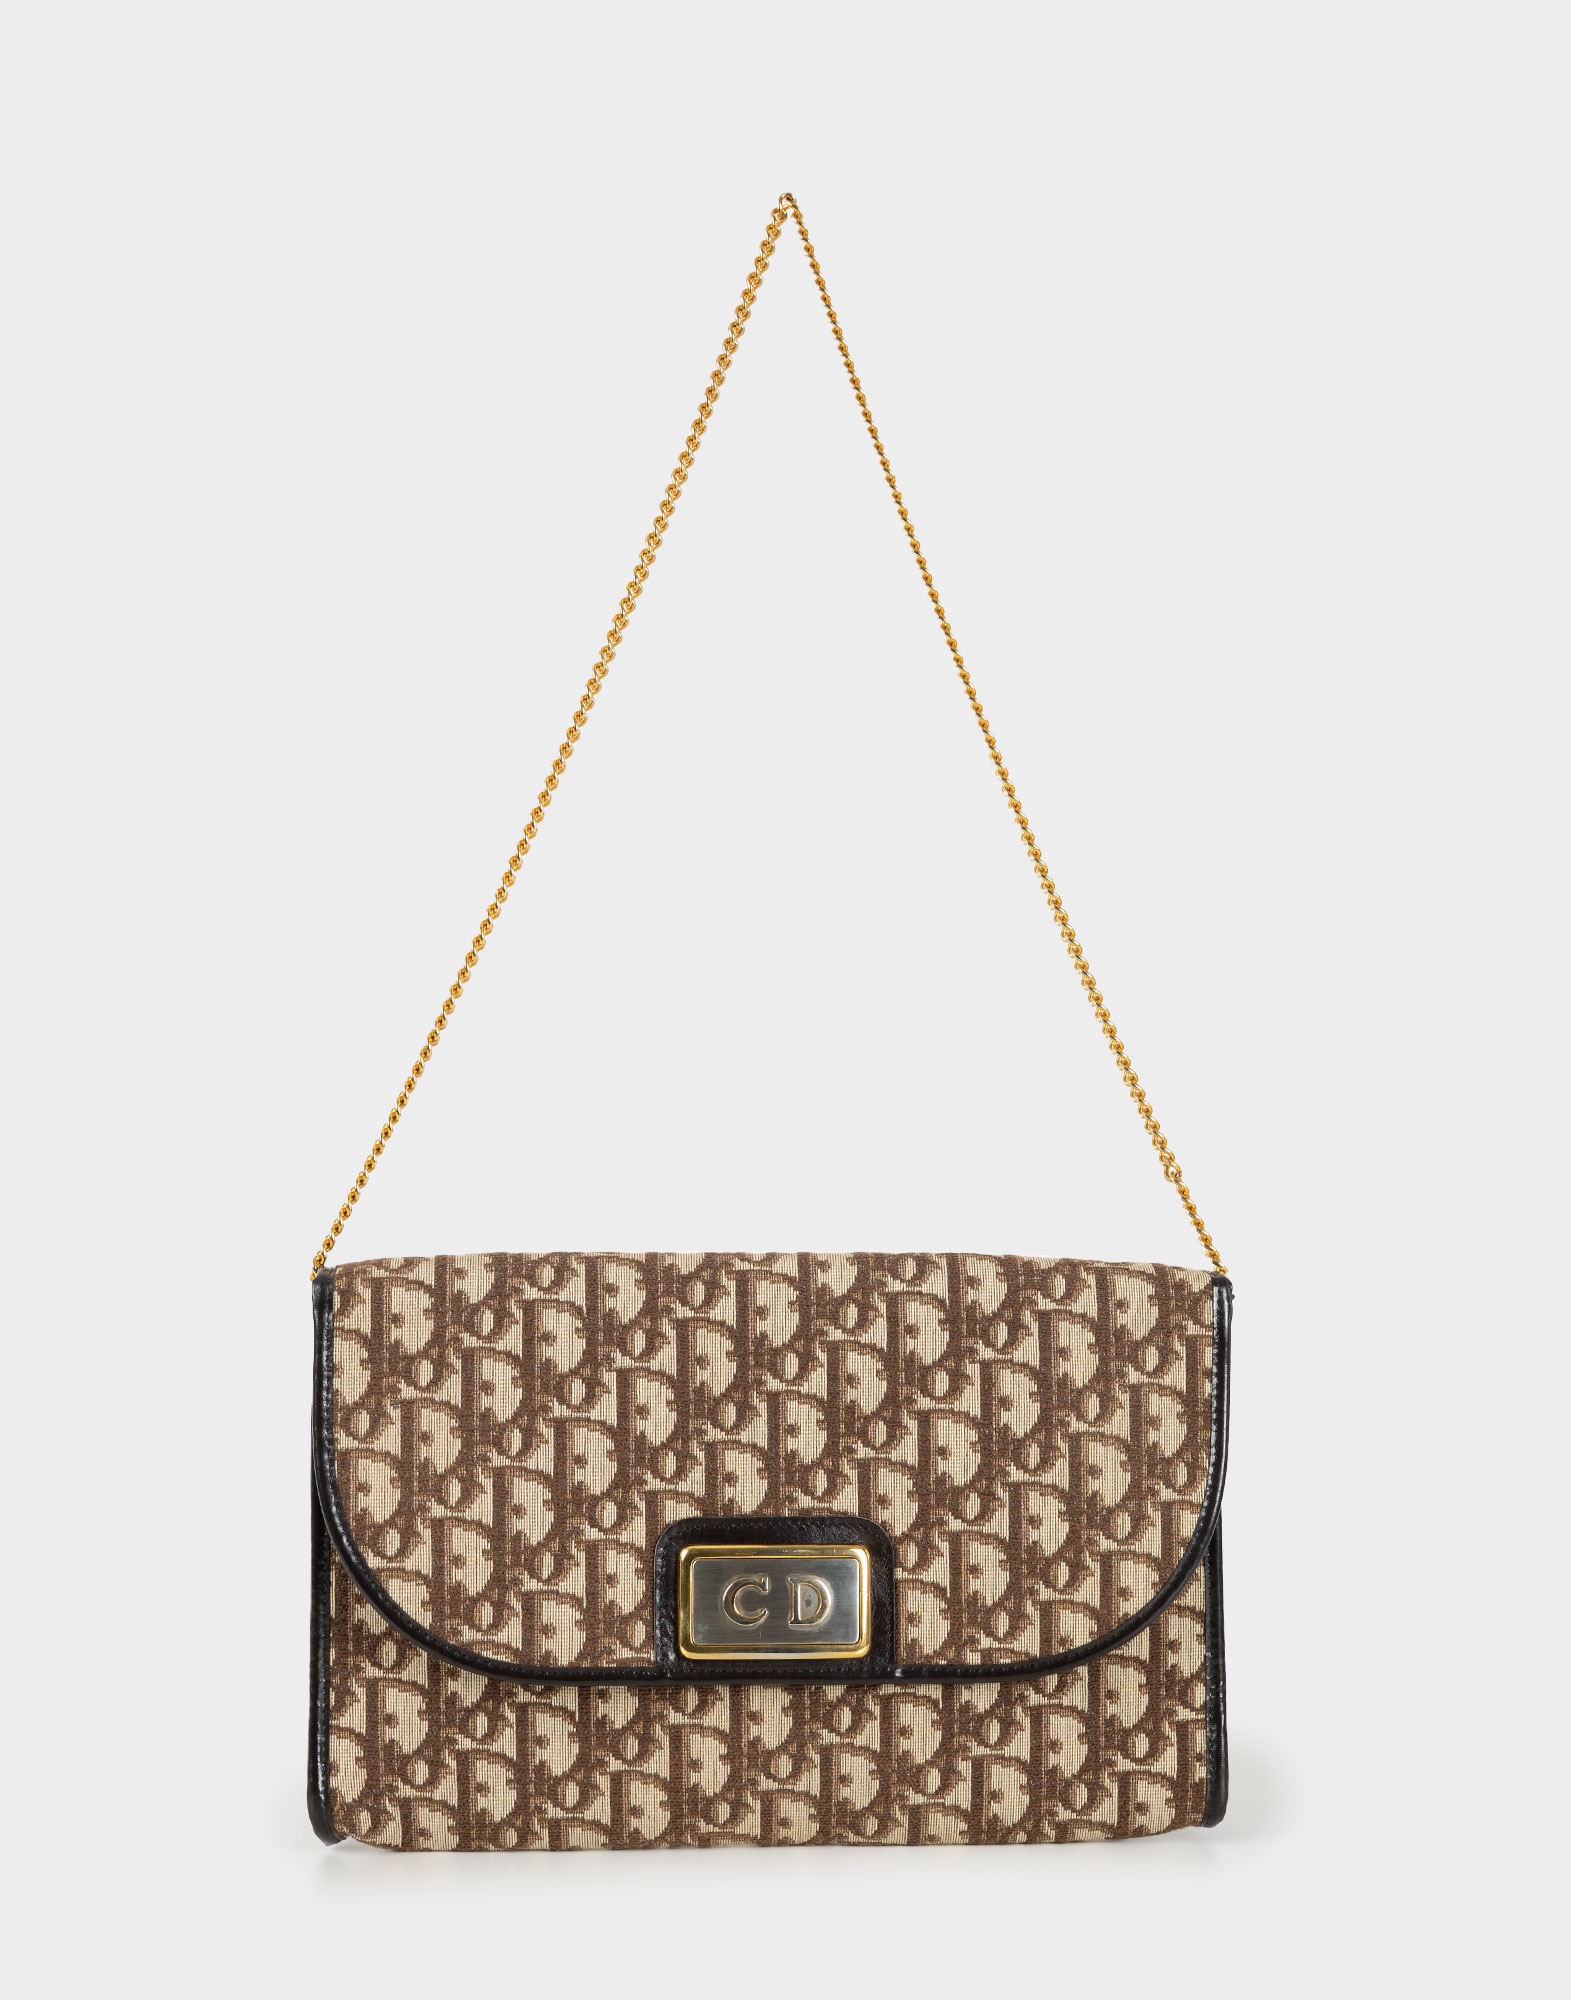 beige and brown fabric clutch handbag with monogram pattern and gold chain